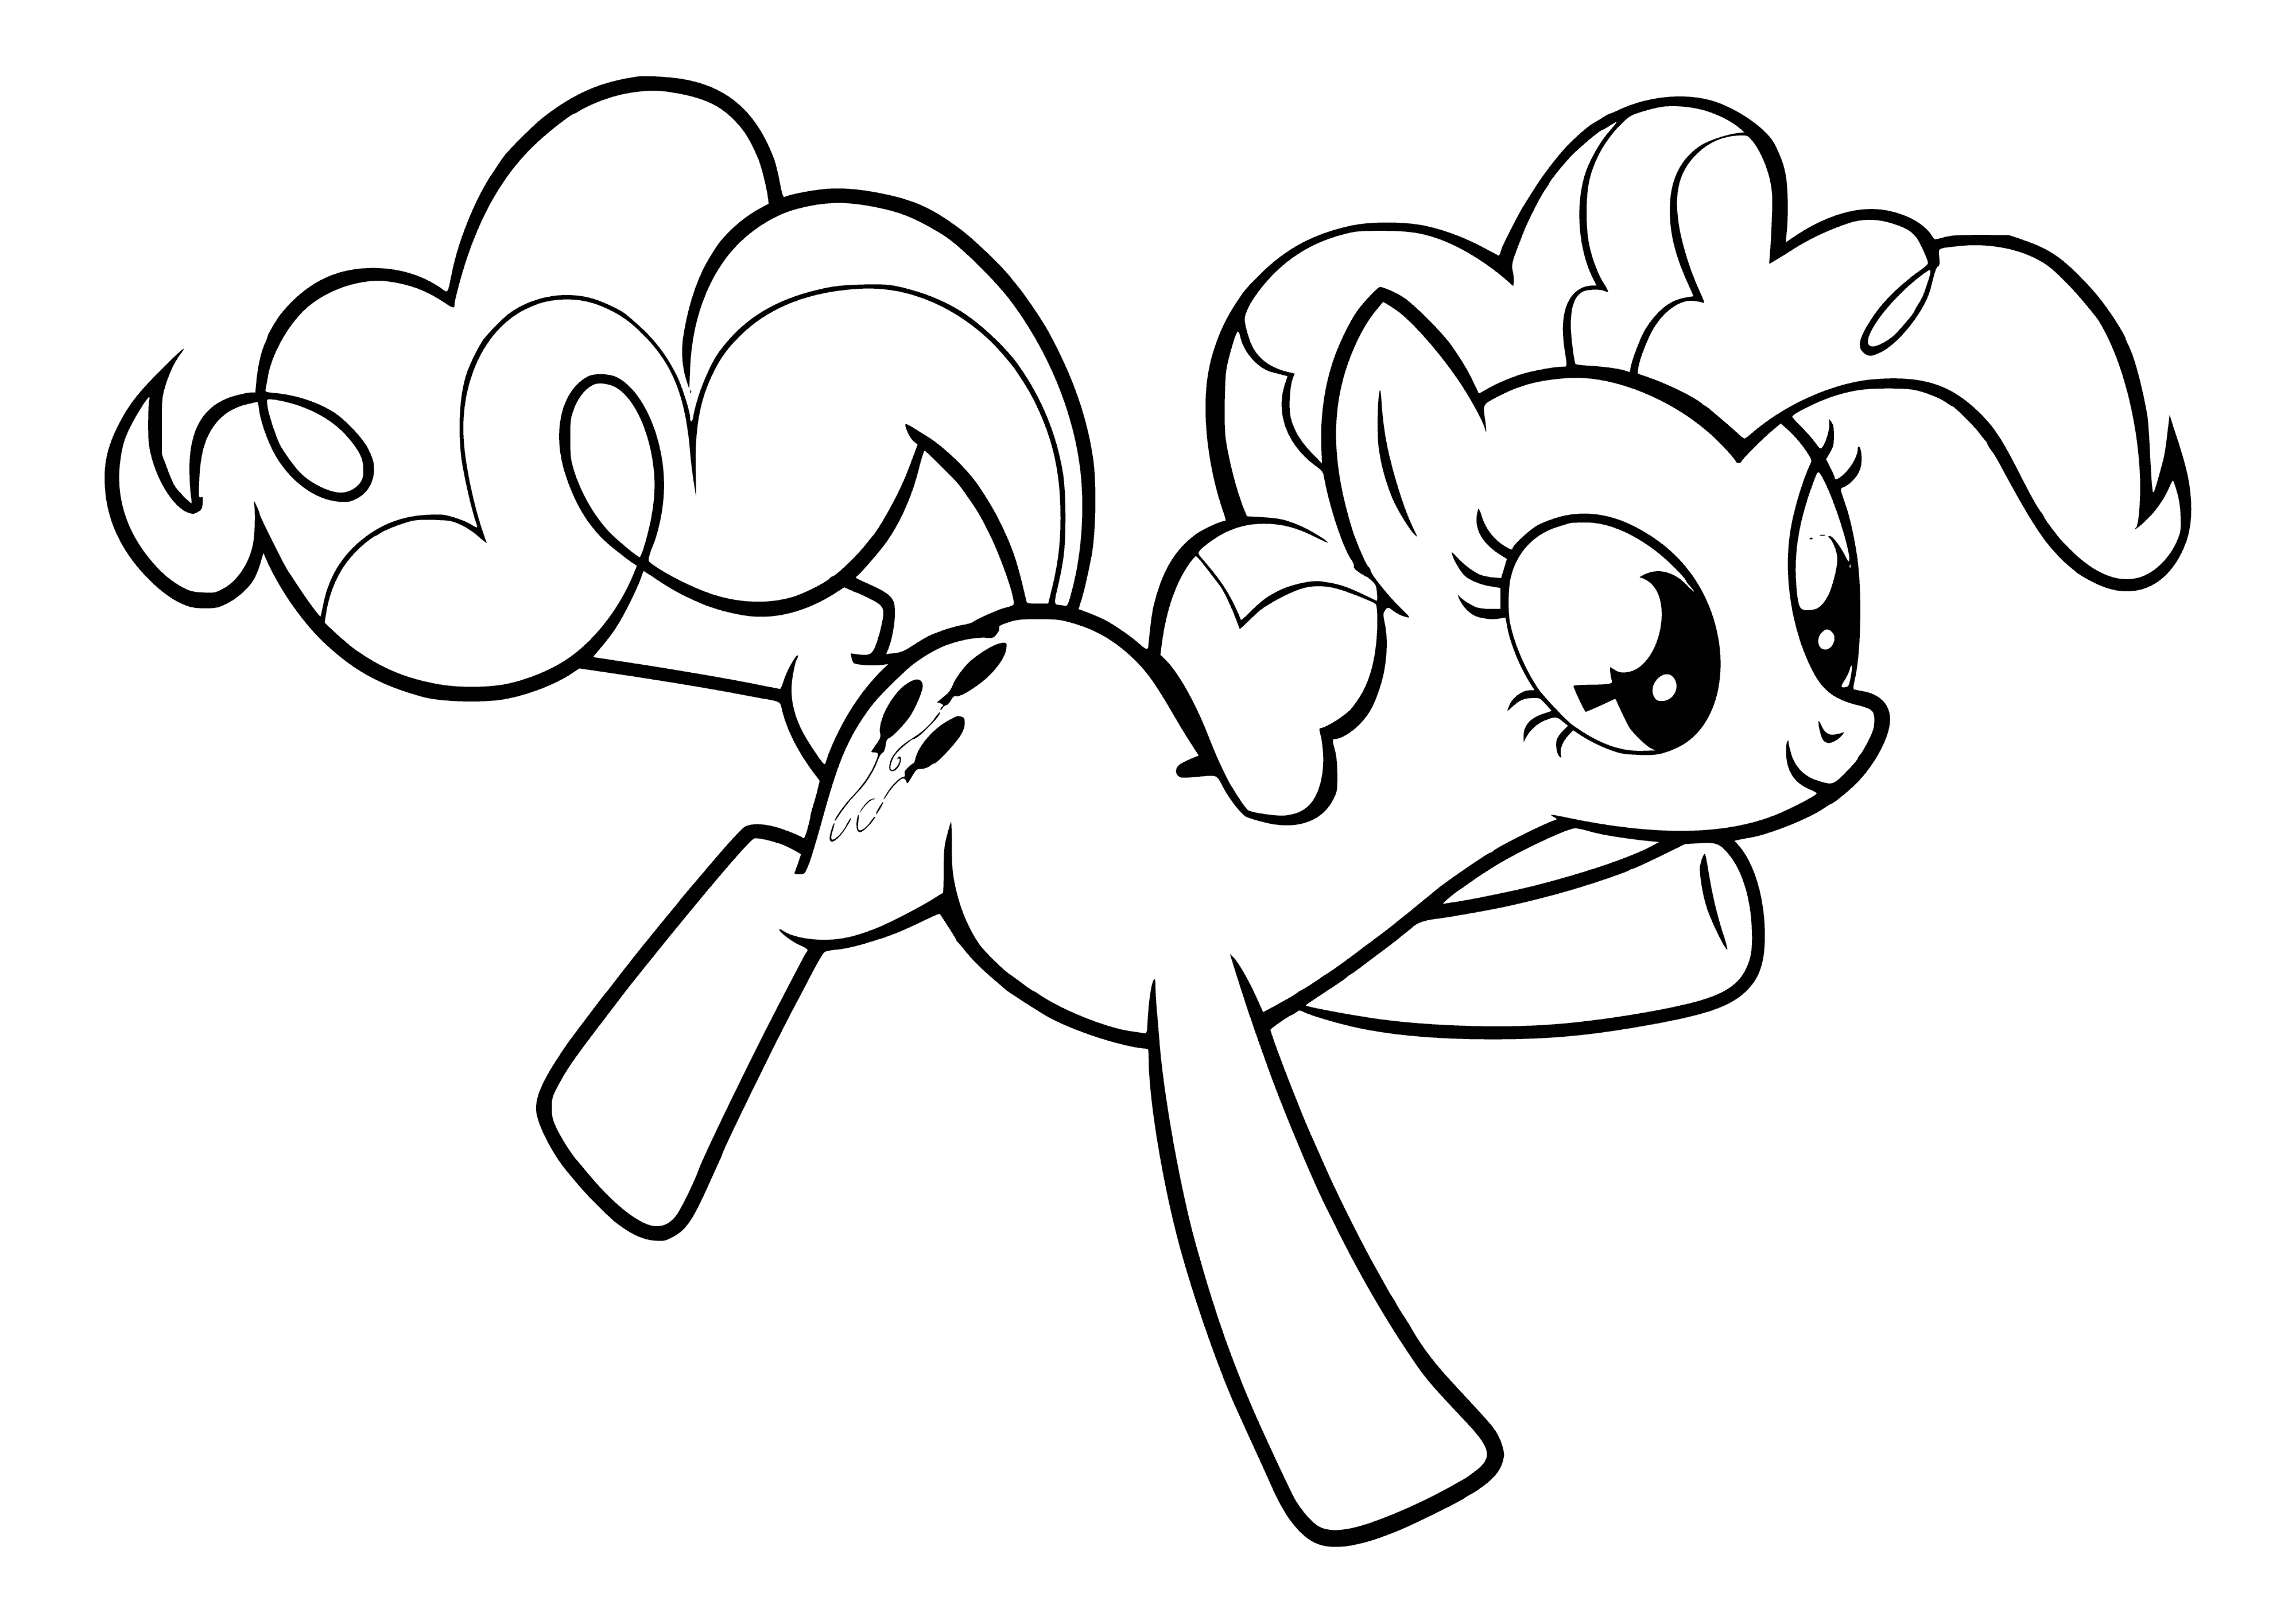 Pony Pinky Pie is a small pink pony w/ a white mane & tail, & a cutie mark of 3 pink balloons.